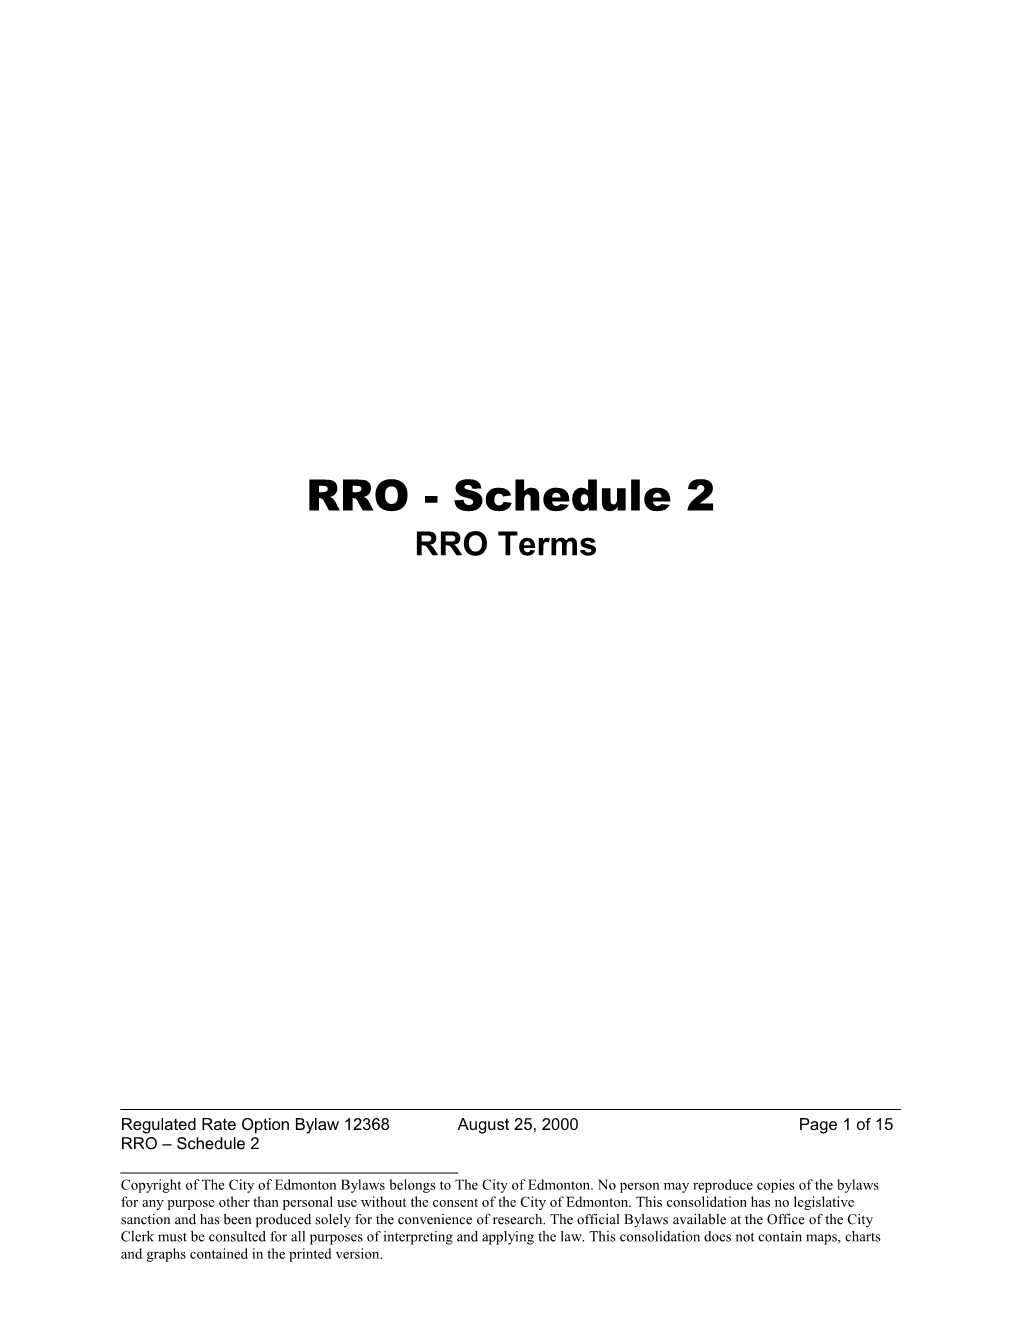 Regulated Rate Option Bylaw Schedule 2 12368